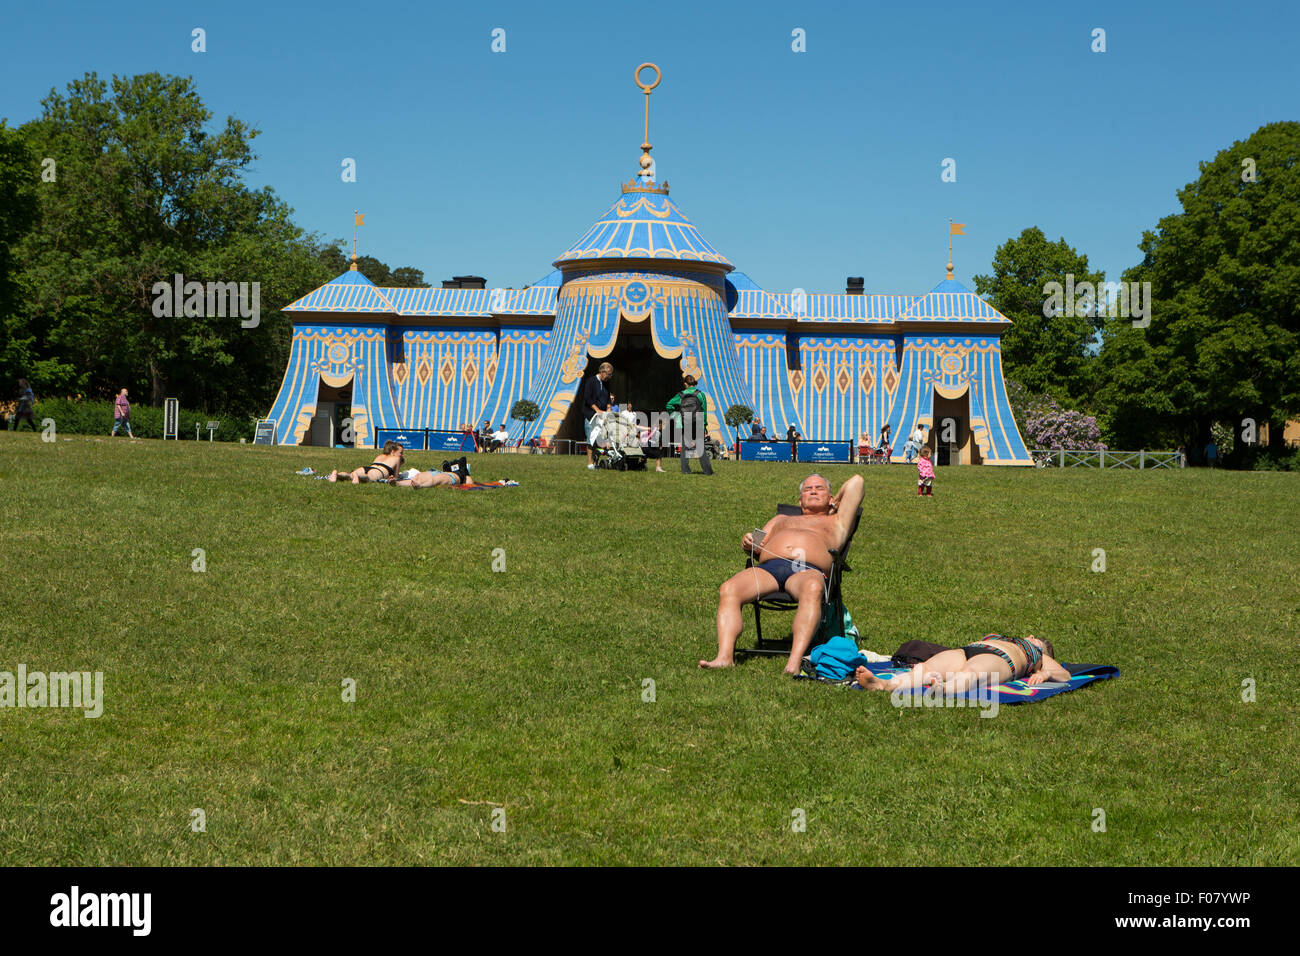 People sunbathing at the Copper Tent at the Haga Park. Stock Photo